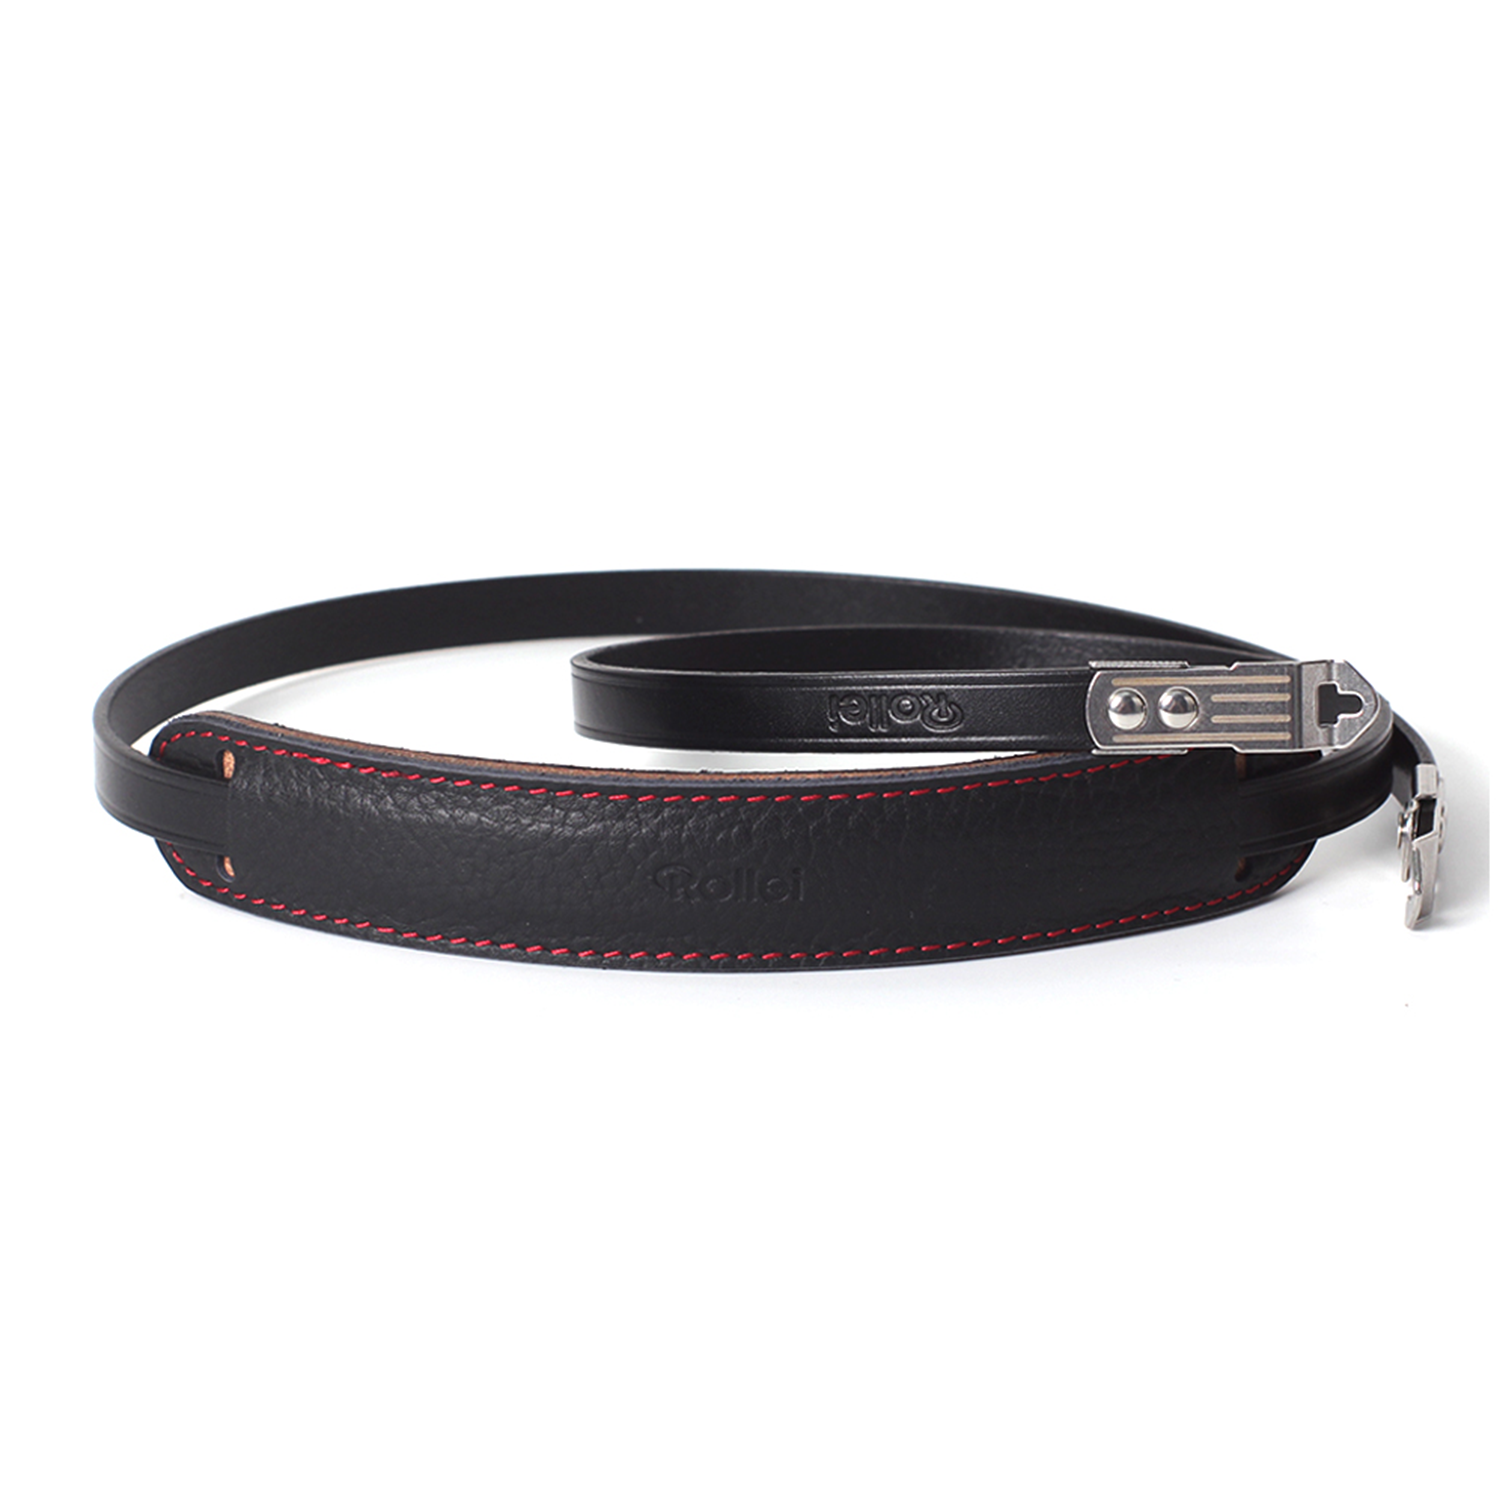 Soft Leather Strips Leather Bands Red Blue Black White 